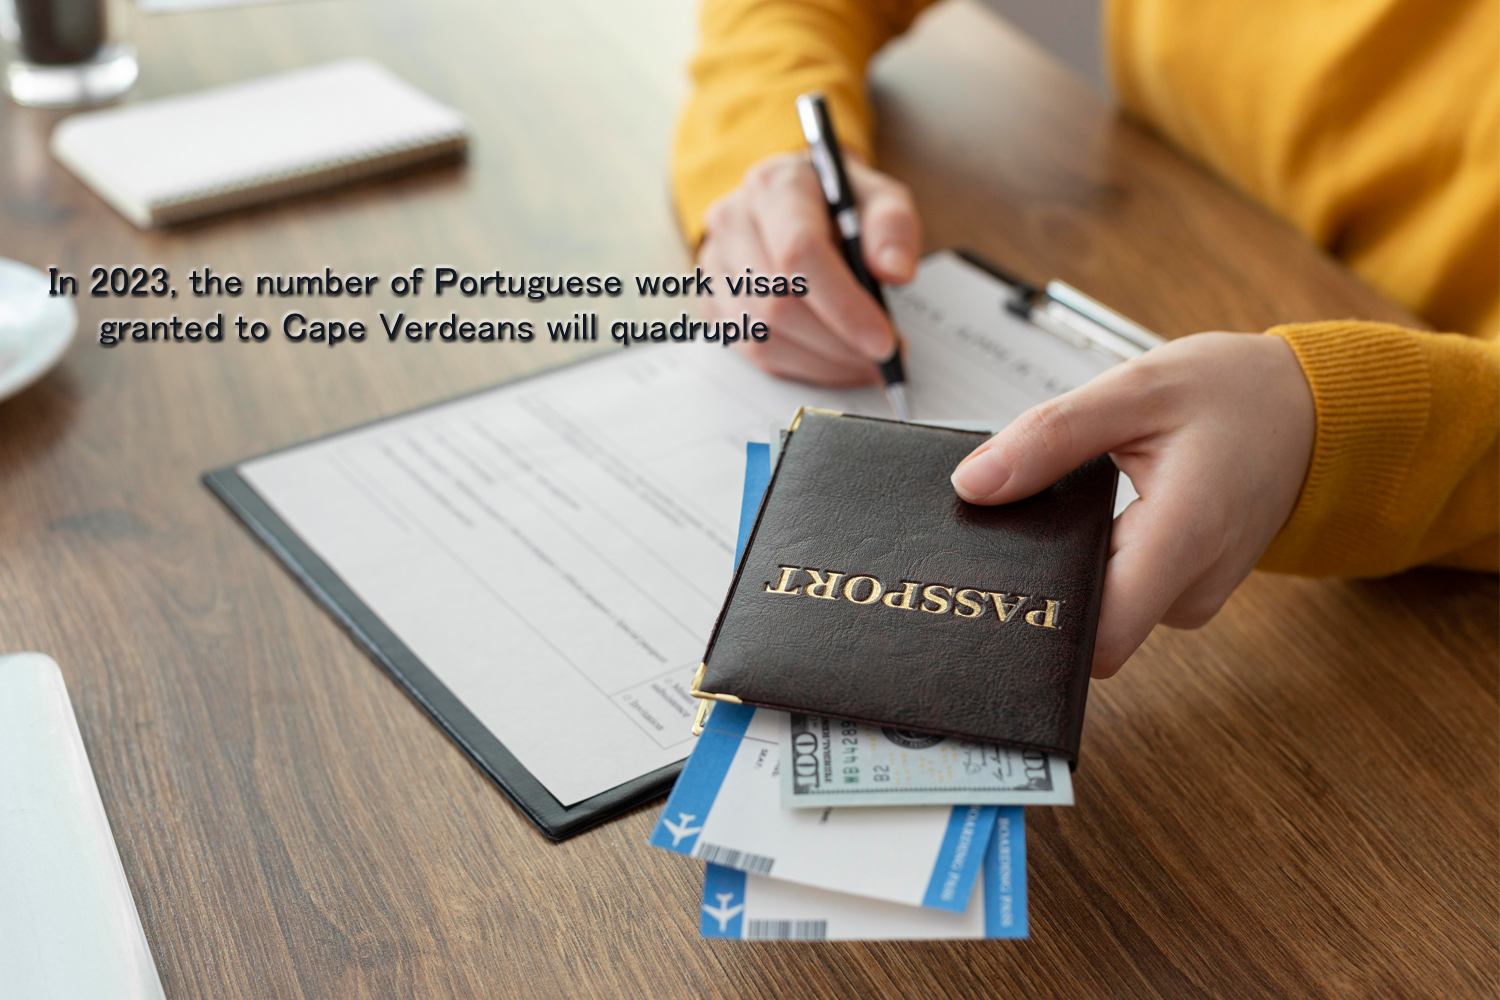 In 2023, the number of Portuguese work visas granted to Cape Verdeans will quadruple.